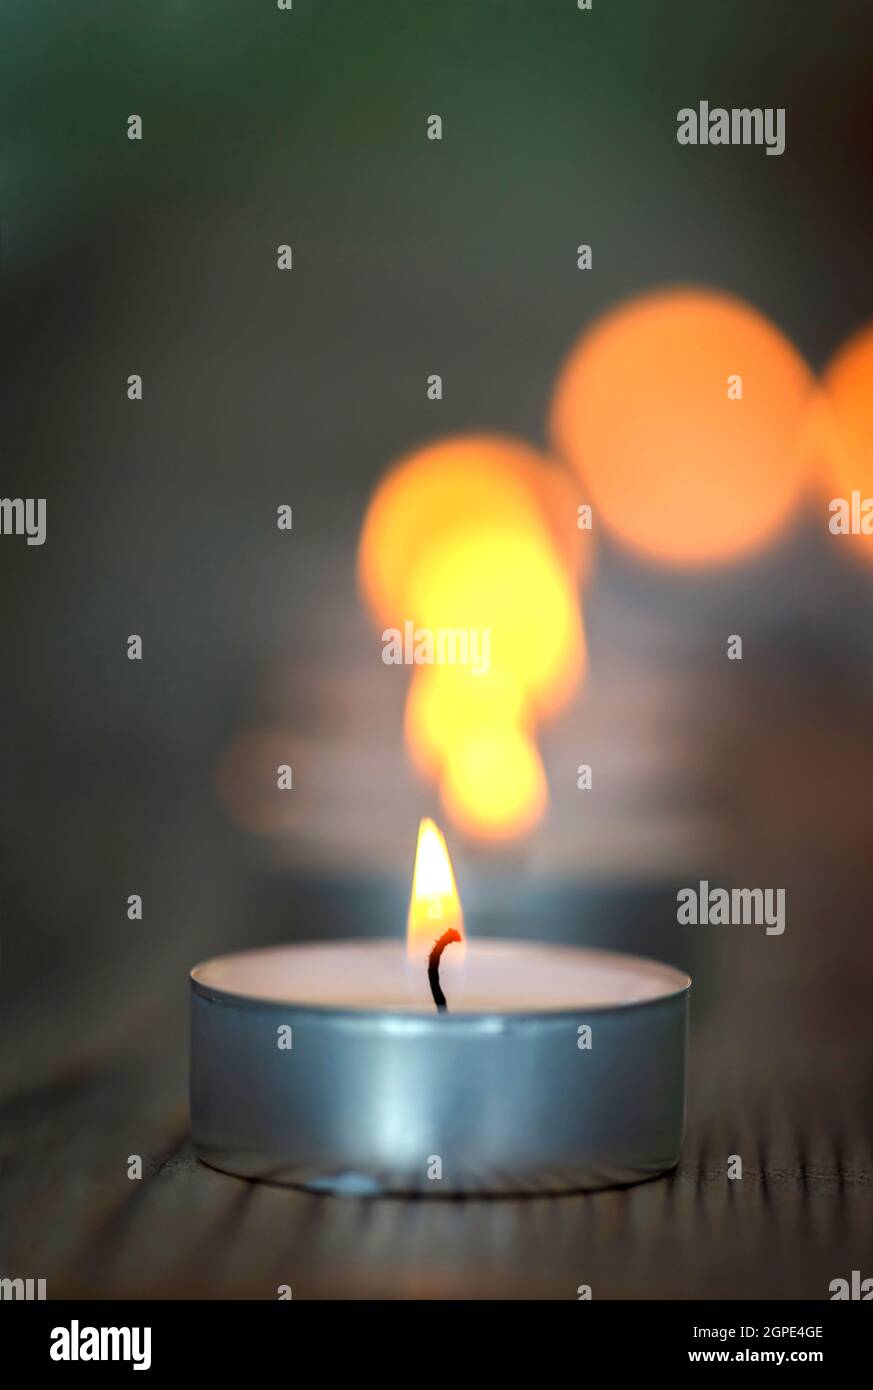 Many small burning candles on a wooden surface Stock Photo